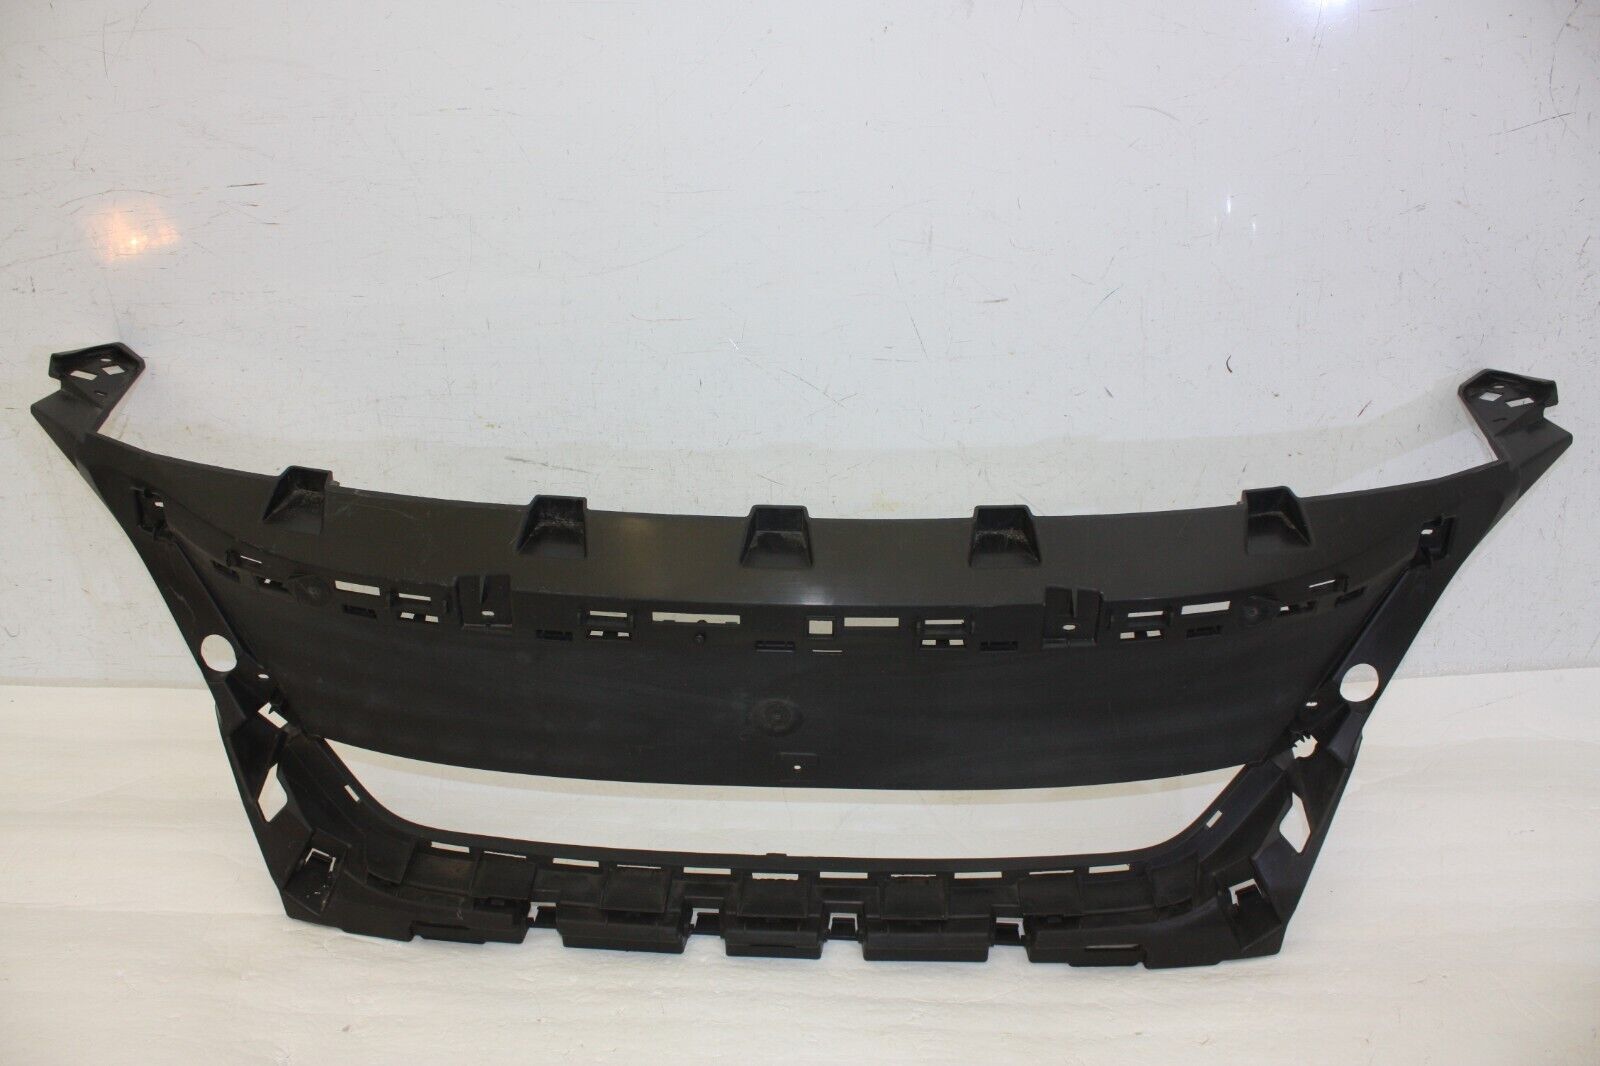 Peugeot 3008 Front Bumper Grill Bracket 2017 to 2021 9815317777 Genuine